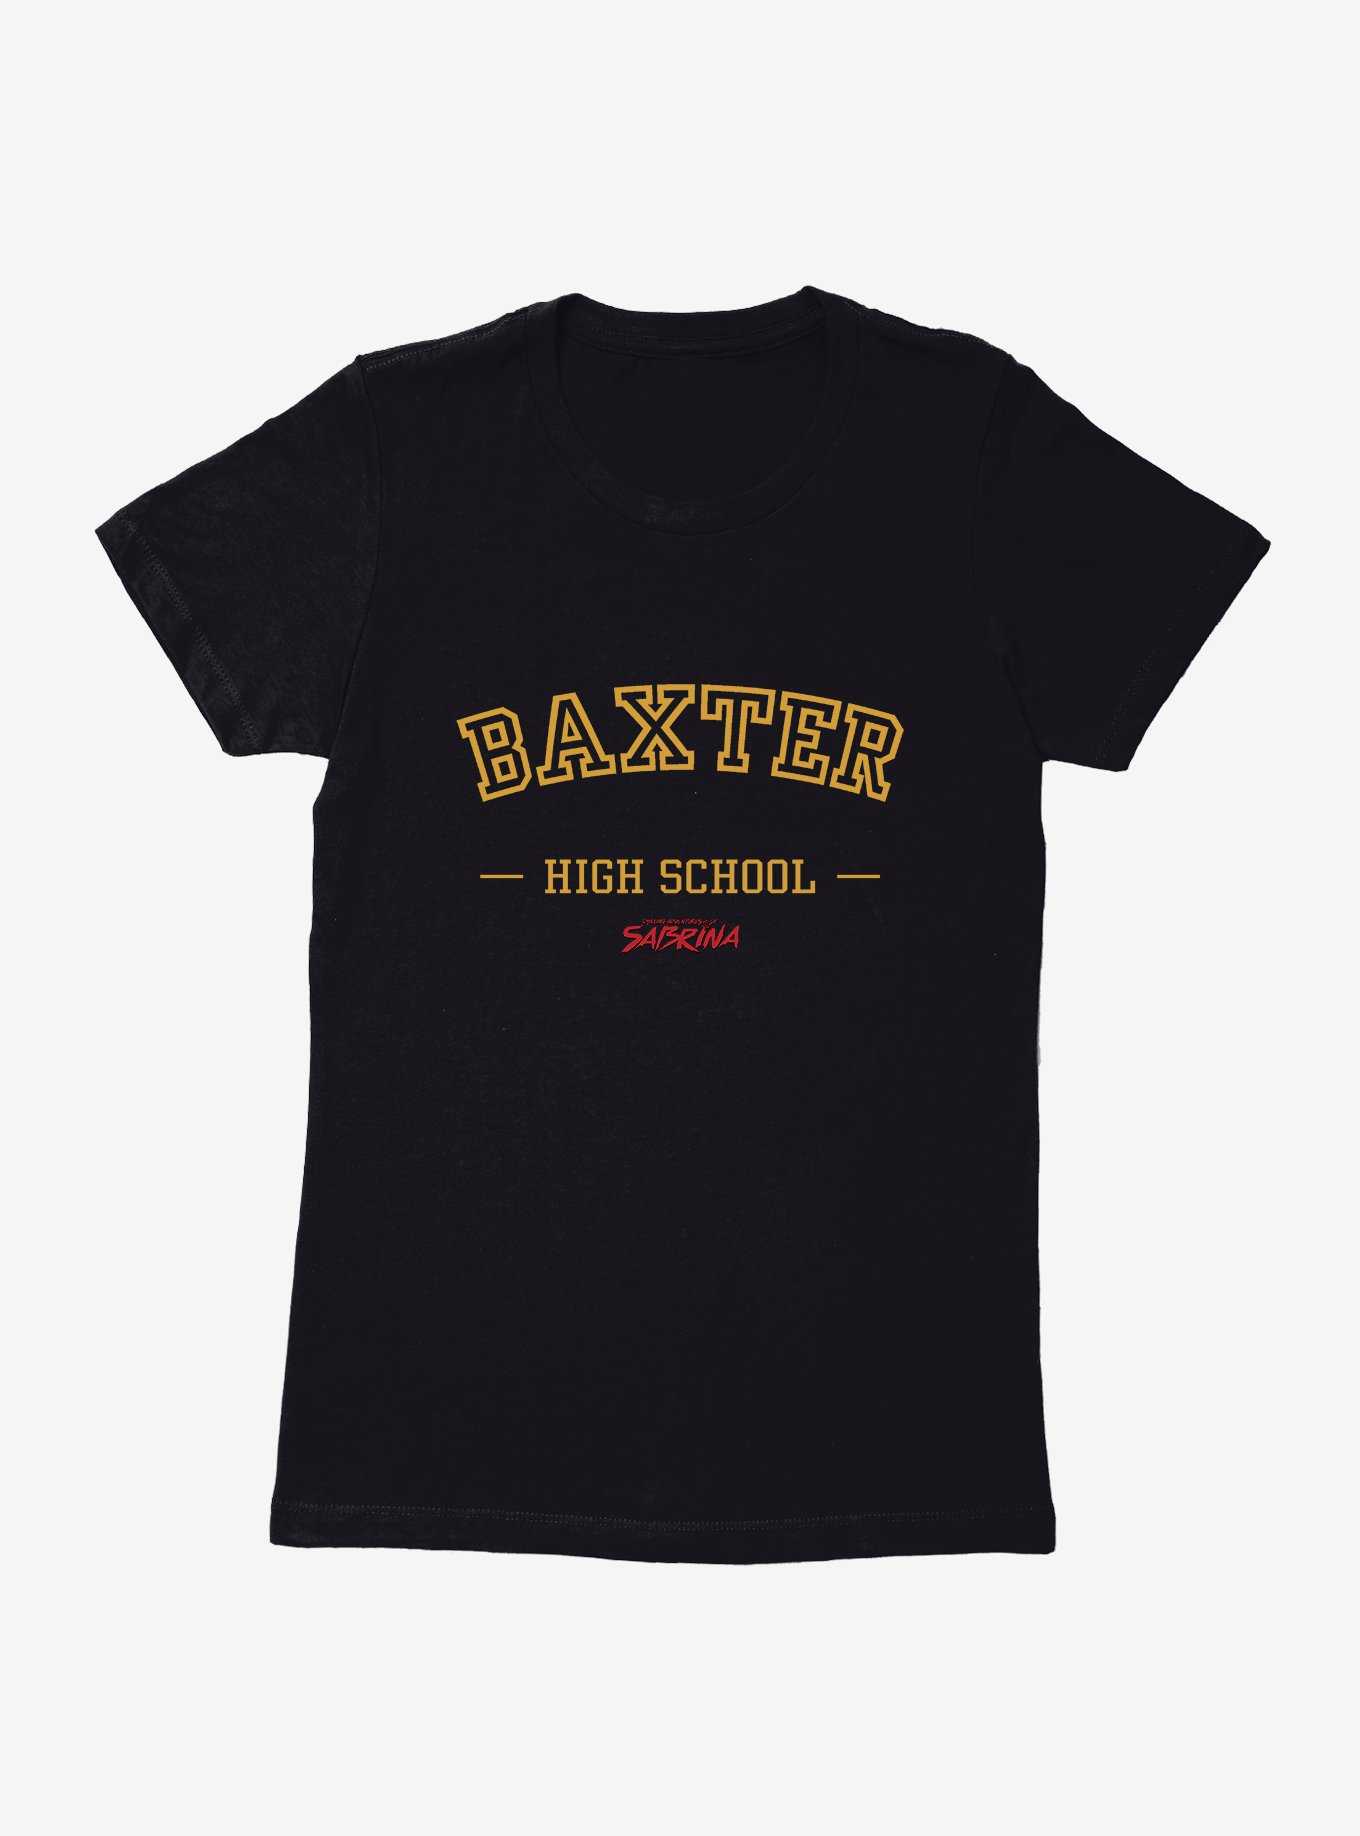 Chilling Adventures Of Sabrina Baxter High Graphic Womens T-Shirt, , hi-res